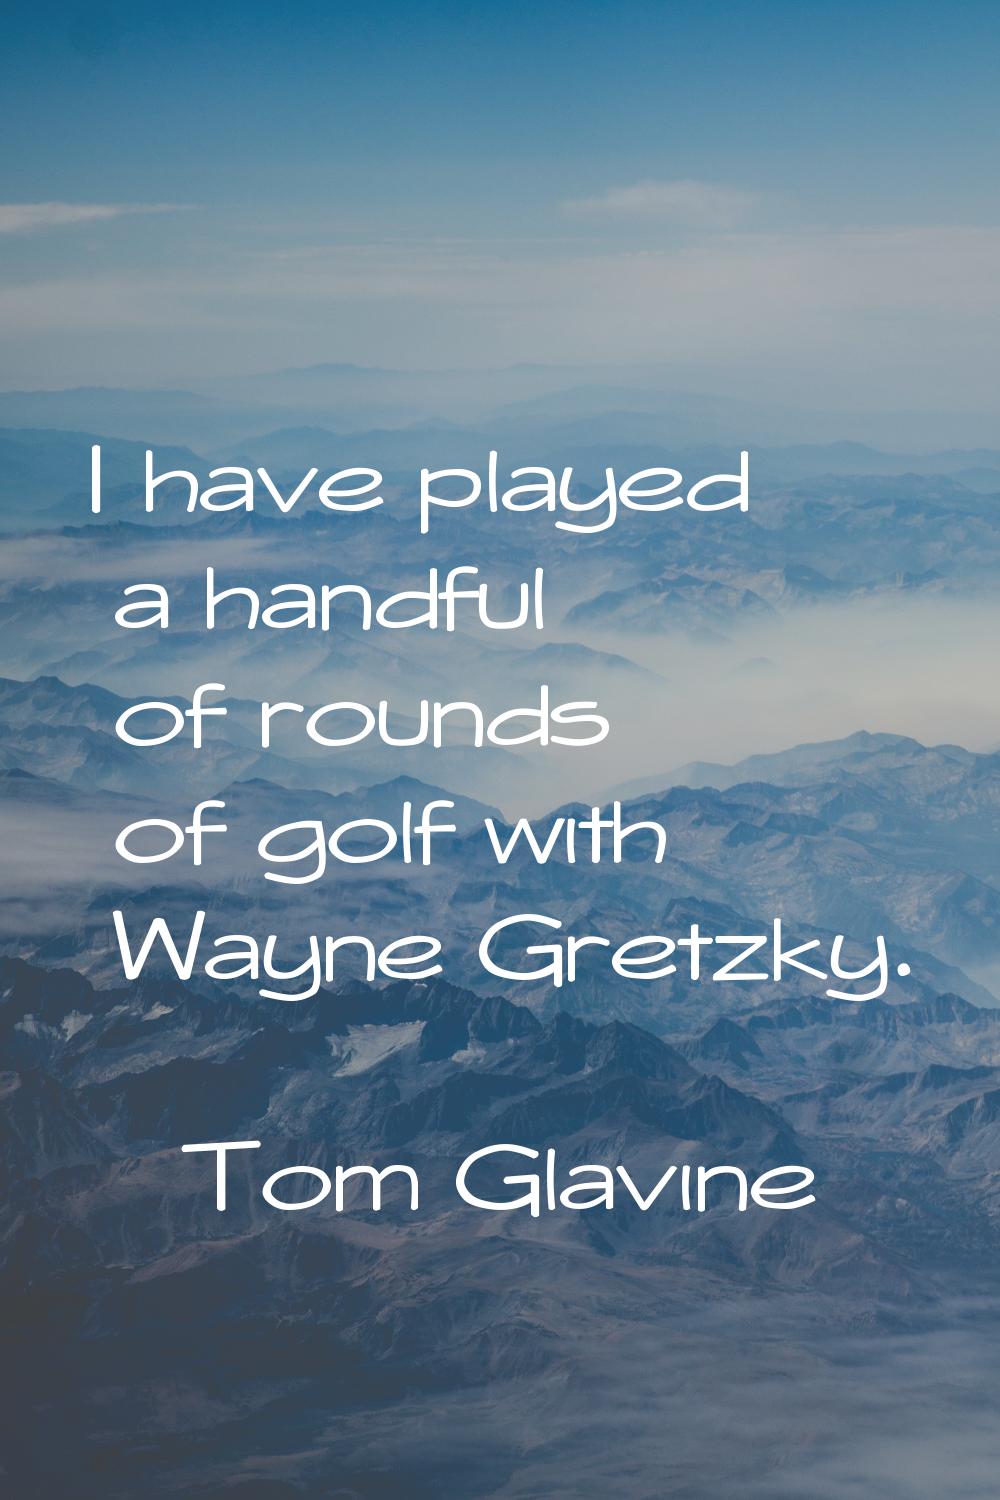 I have played a handful of rounds of golf with Wayne Gretzky.